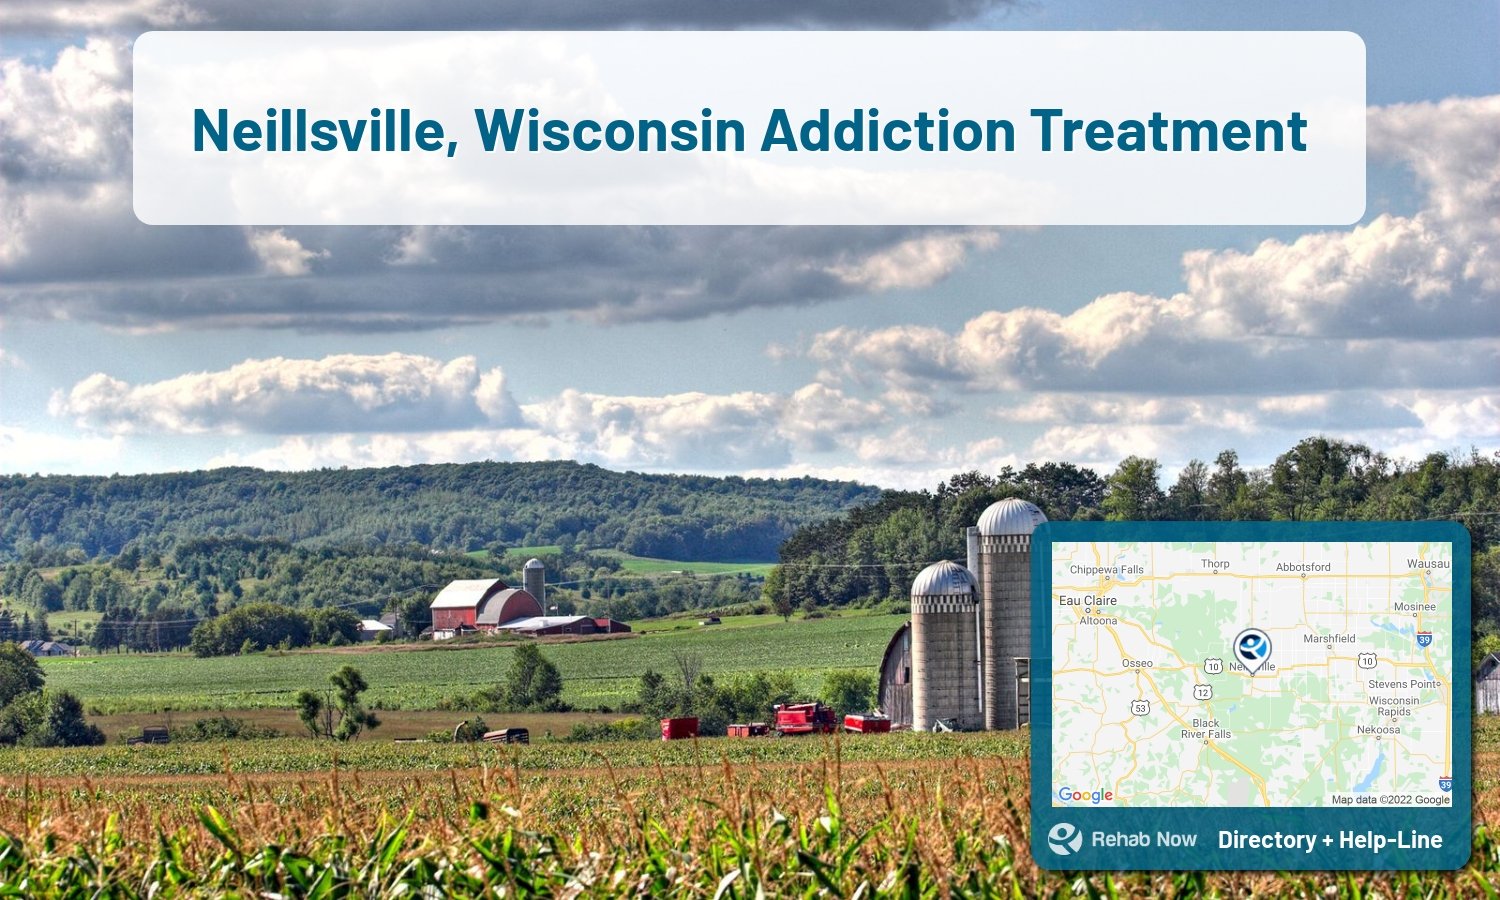 List of alcohol and drug treatment centers near you in Neillsville, Wisconsin. Research certifications, programs, methods, pricing, and more.